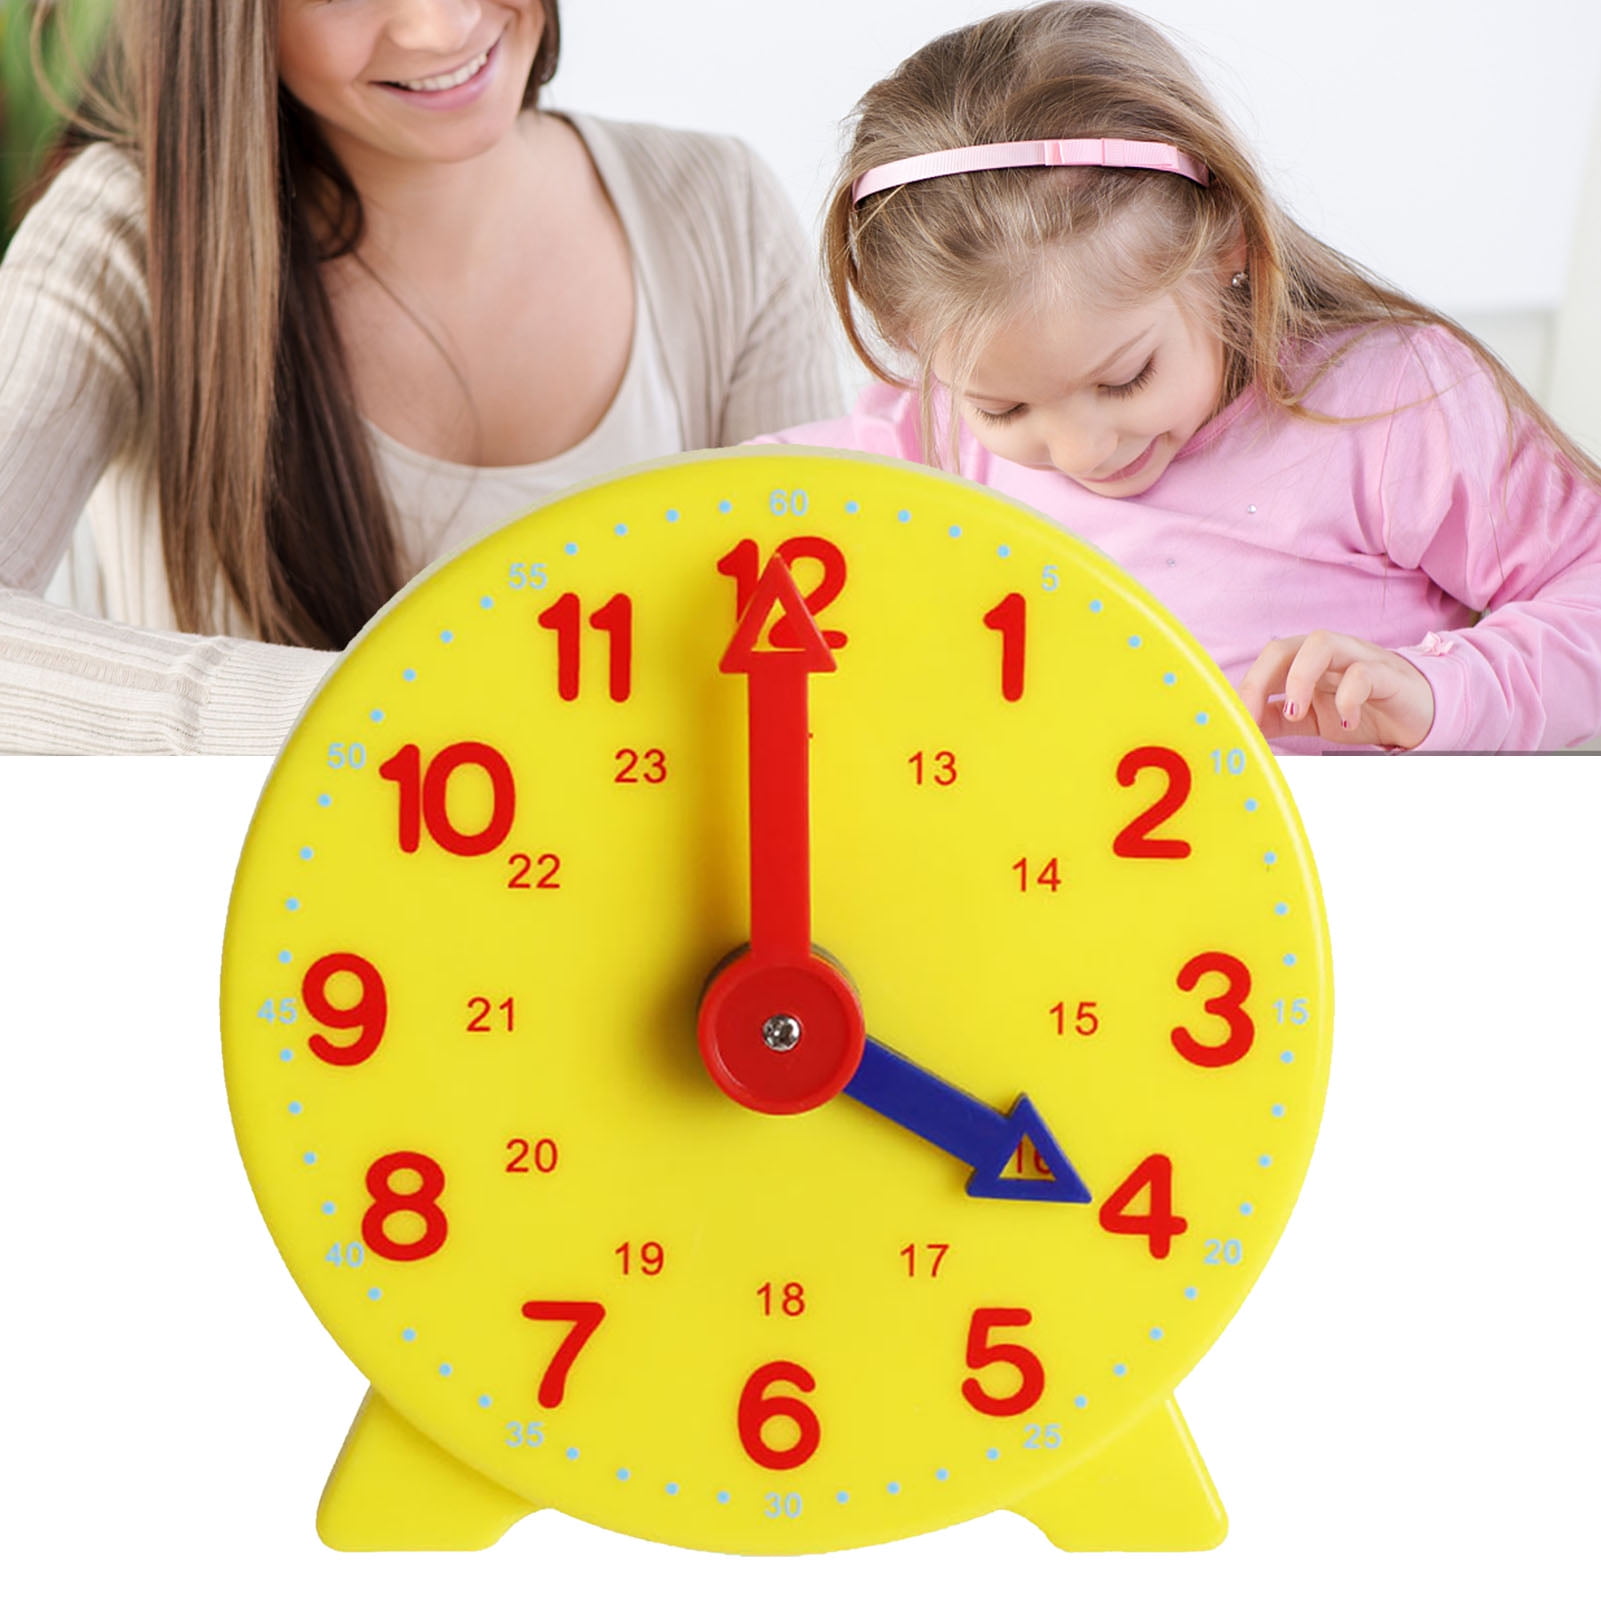 Childrens Learning Teaching Number Plastic Clock Kids Time Educational Toy LA 